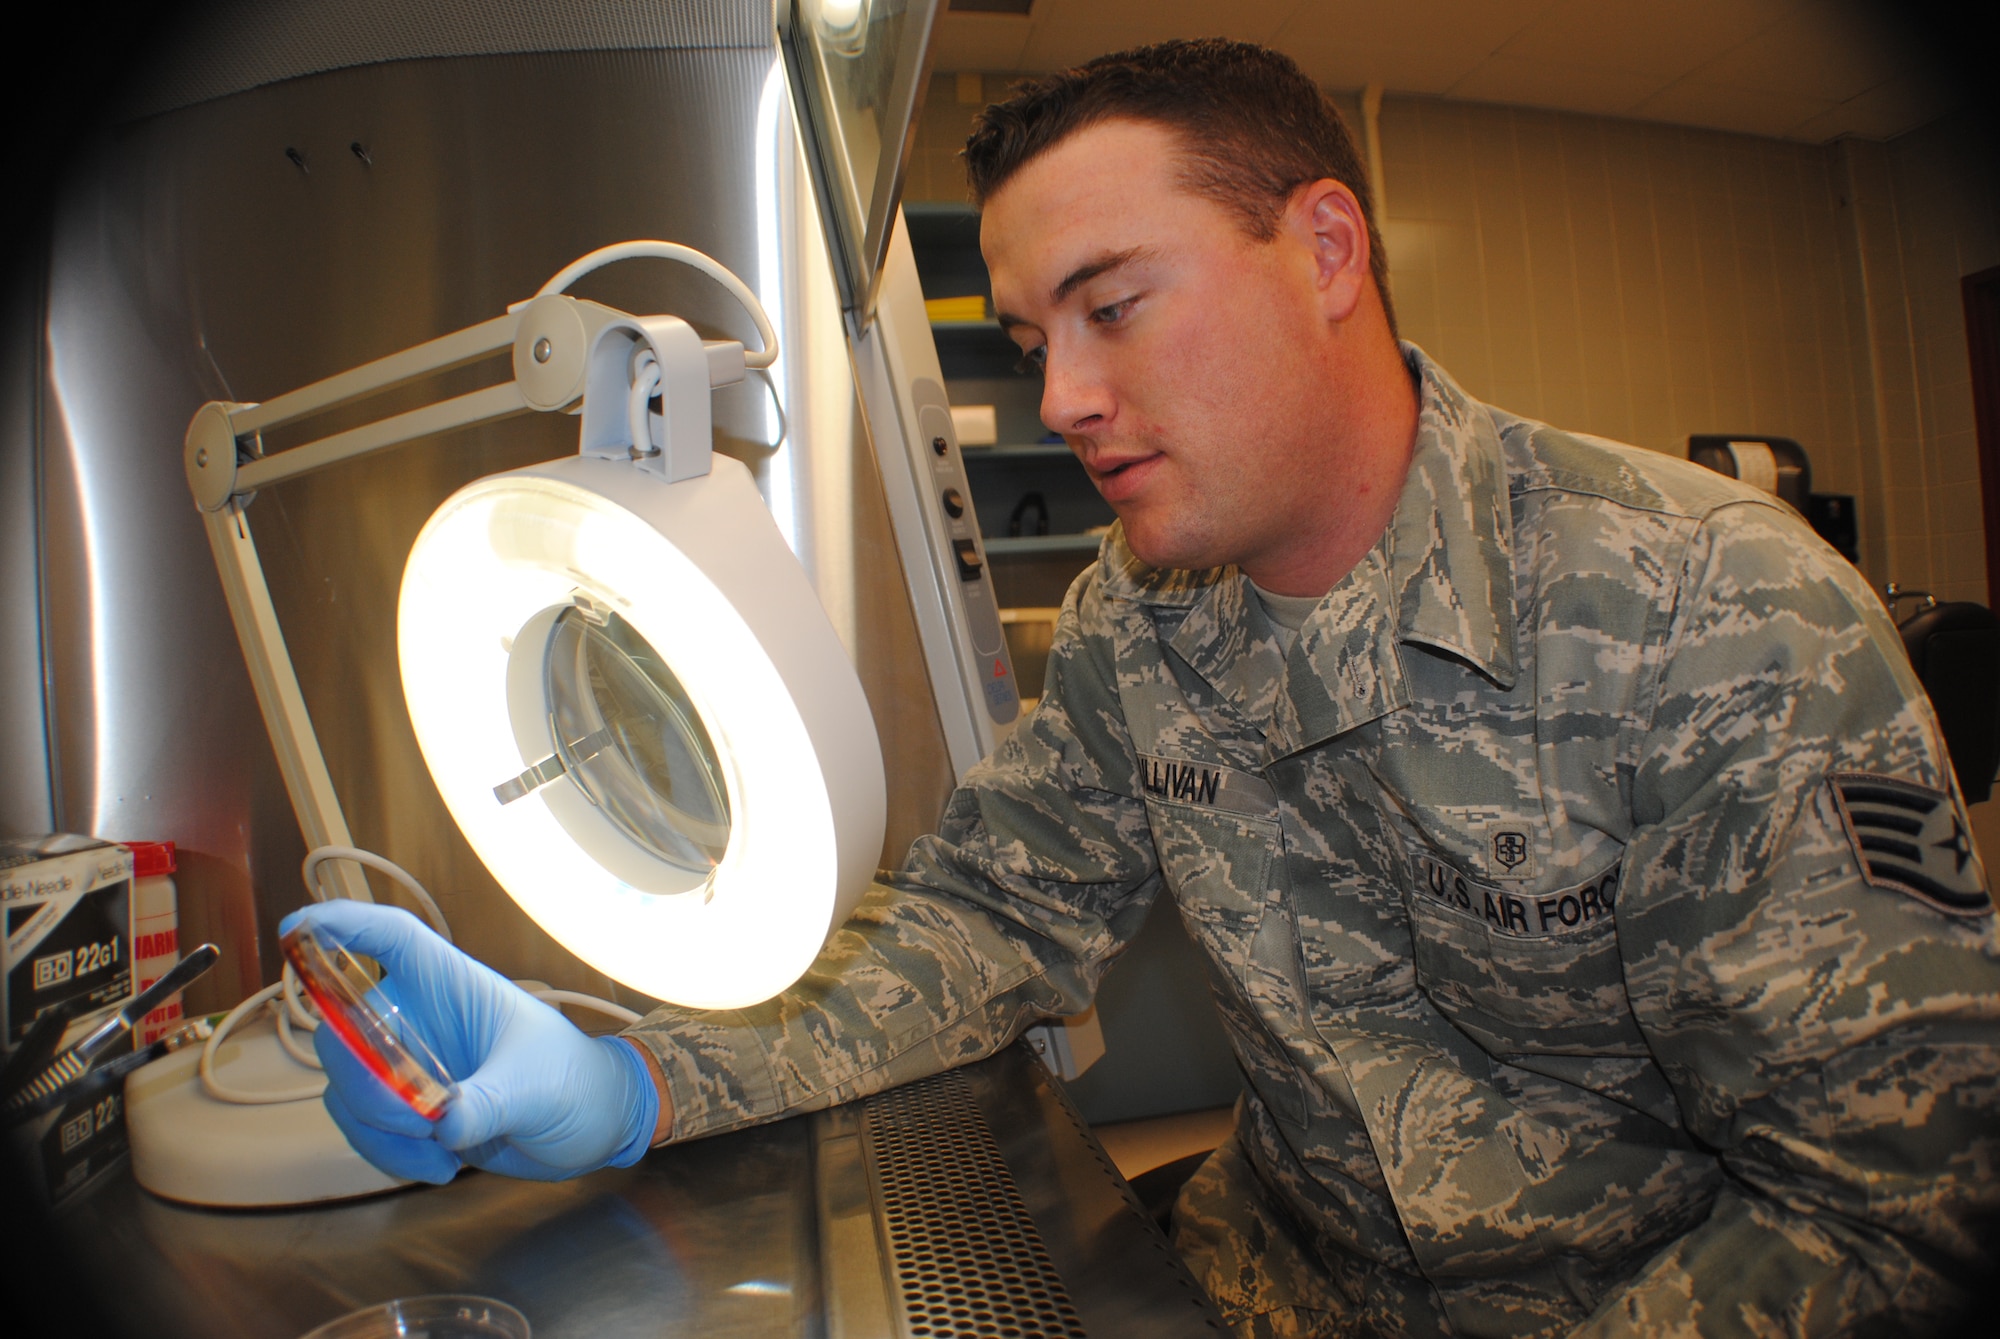 Staff Sgt. Thomas C. Sullivan Jr., 319th Medical Support Squadron laboratory technician, checks the growth progress of bacteria cultures using a magnifying lamp inside a bio-safety examining cabinet May 22, 2013, at Grand Forks Air Force Base, N.D. Air Force medical lab technicians go through a four month-long training course at Sheppard AFB, Texas, for the first phase of their technical training. (U.S. Air Force photo/Staff Sgt. Luis Loza Gutierrez)